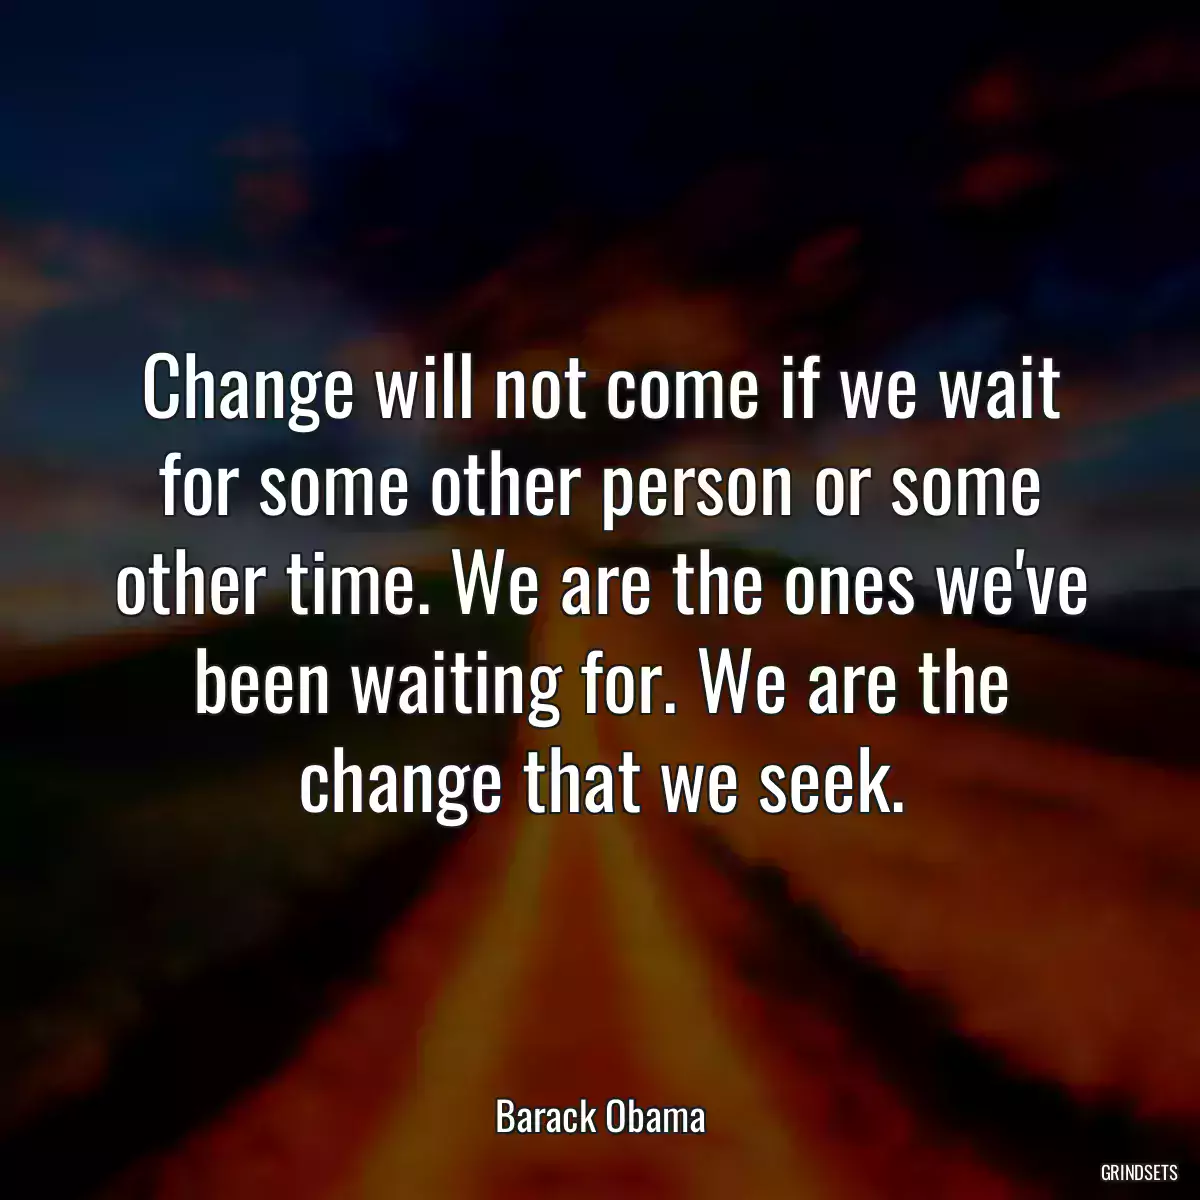 Change will not come if we wait for some other person or some other time. We are the ones we\'ve been waiting for. We are the change that we seek.